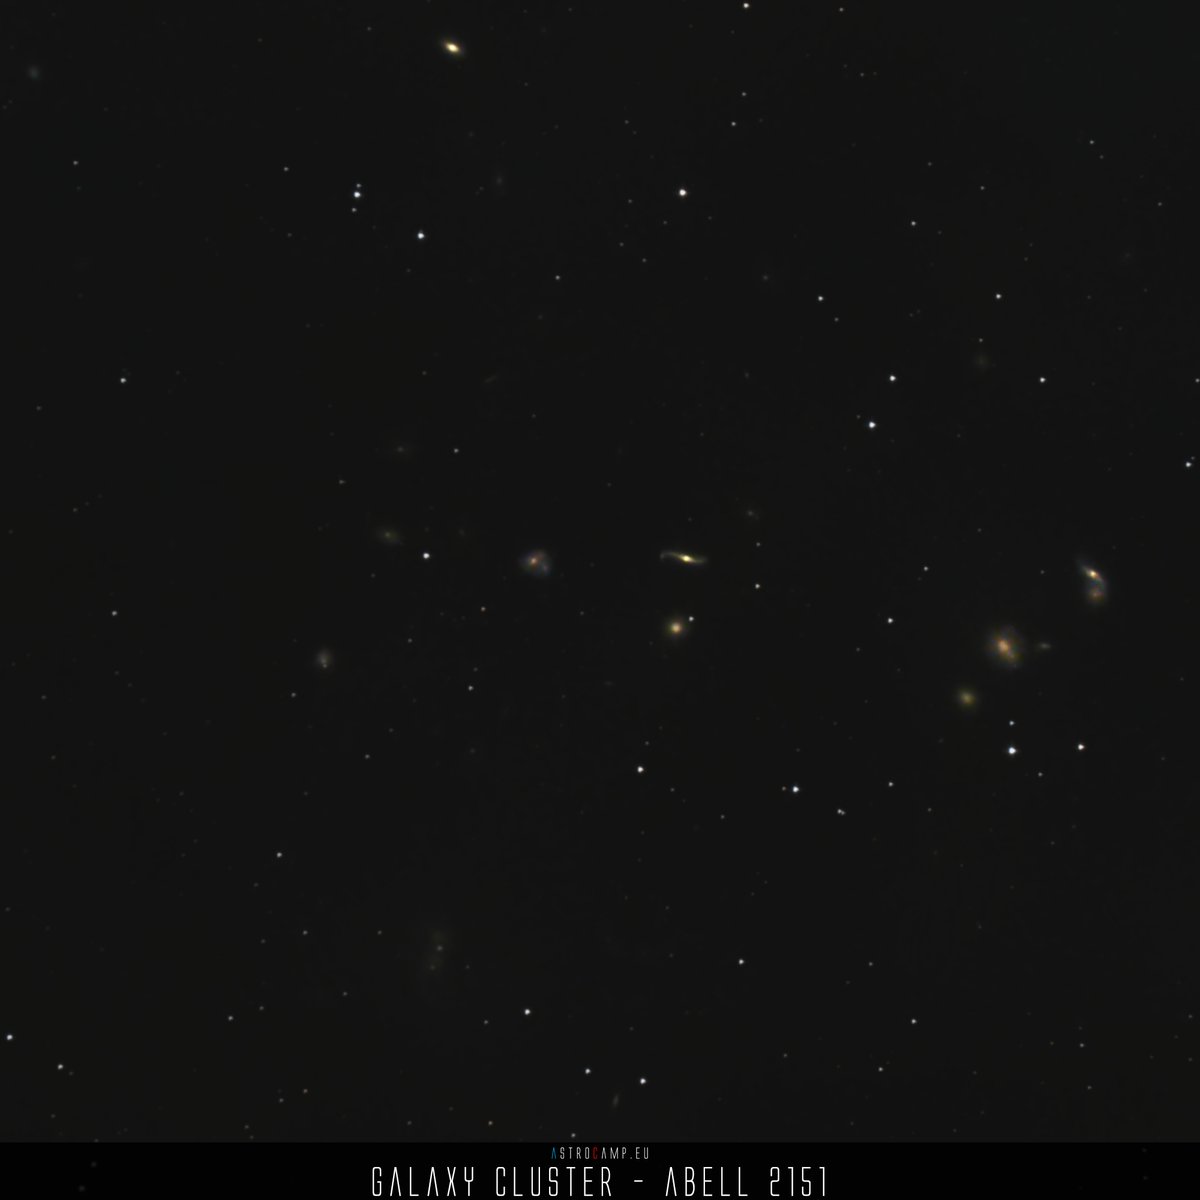 Astrophoto: Galaxy Cluster - Abell 2151 - 06/23 - My attept at collection enough photons from the galaxy group Abell 2151. Even 2 summer nigts are not enough.
 - #Abell2151 #GalaxyCluster #Astrophotography - is.gd/bHnhot